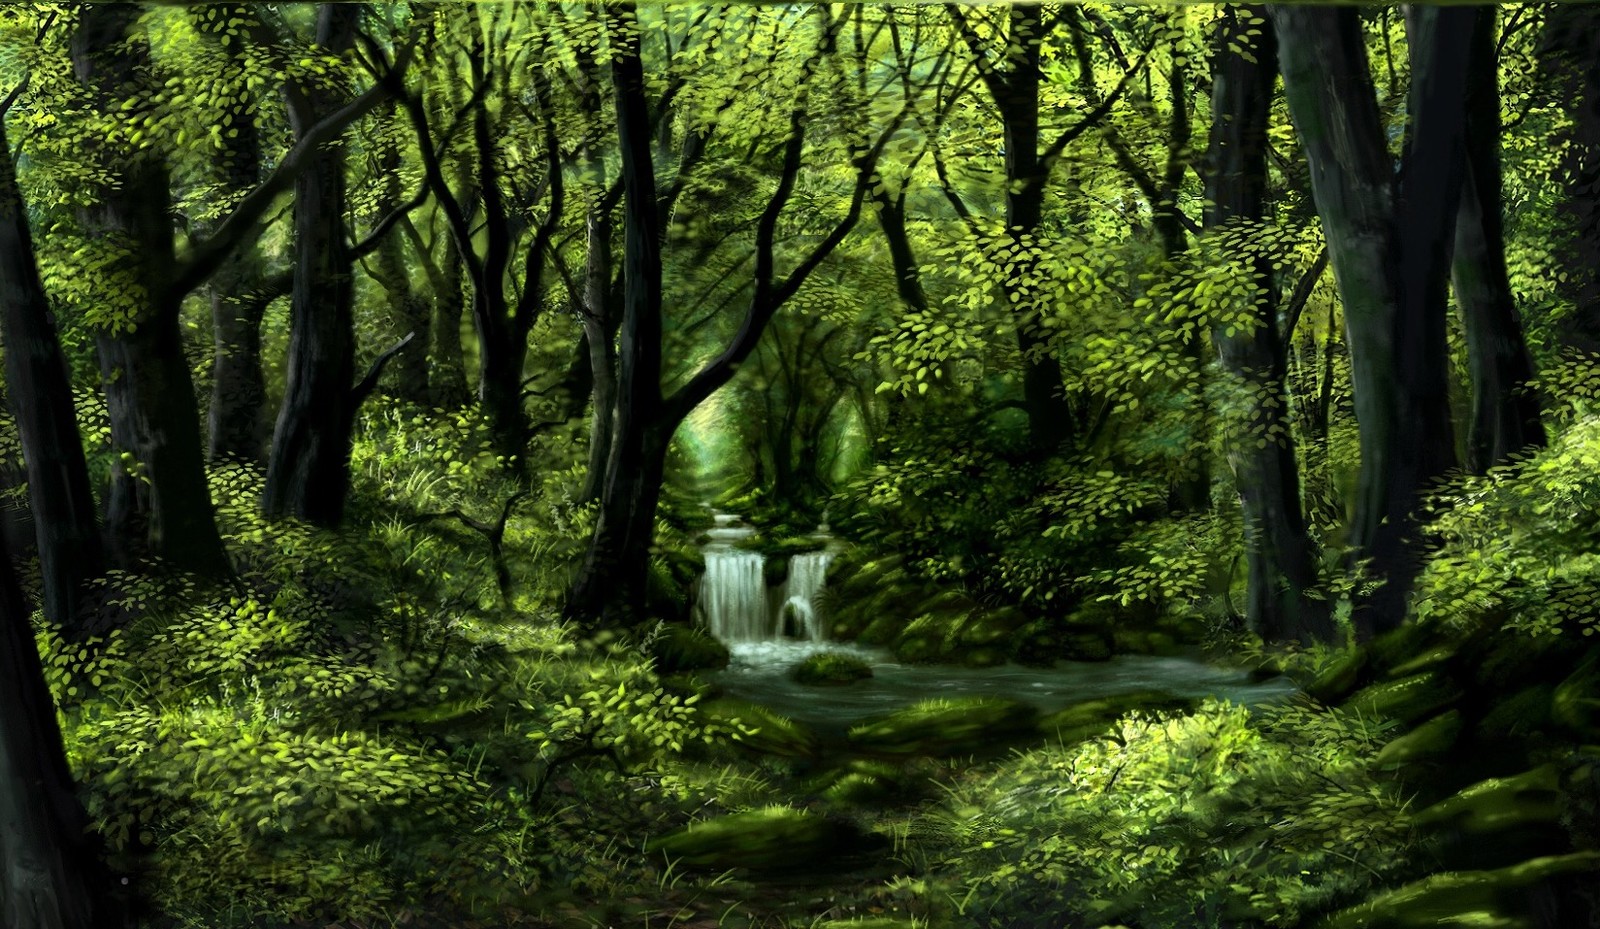 Green forest study (3)